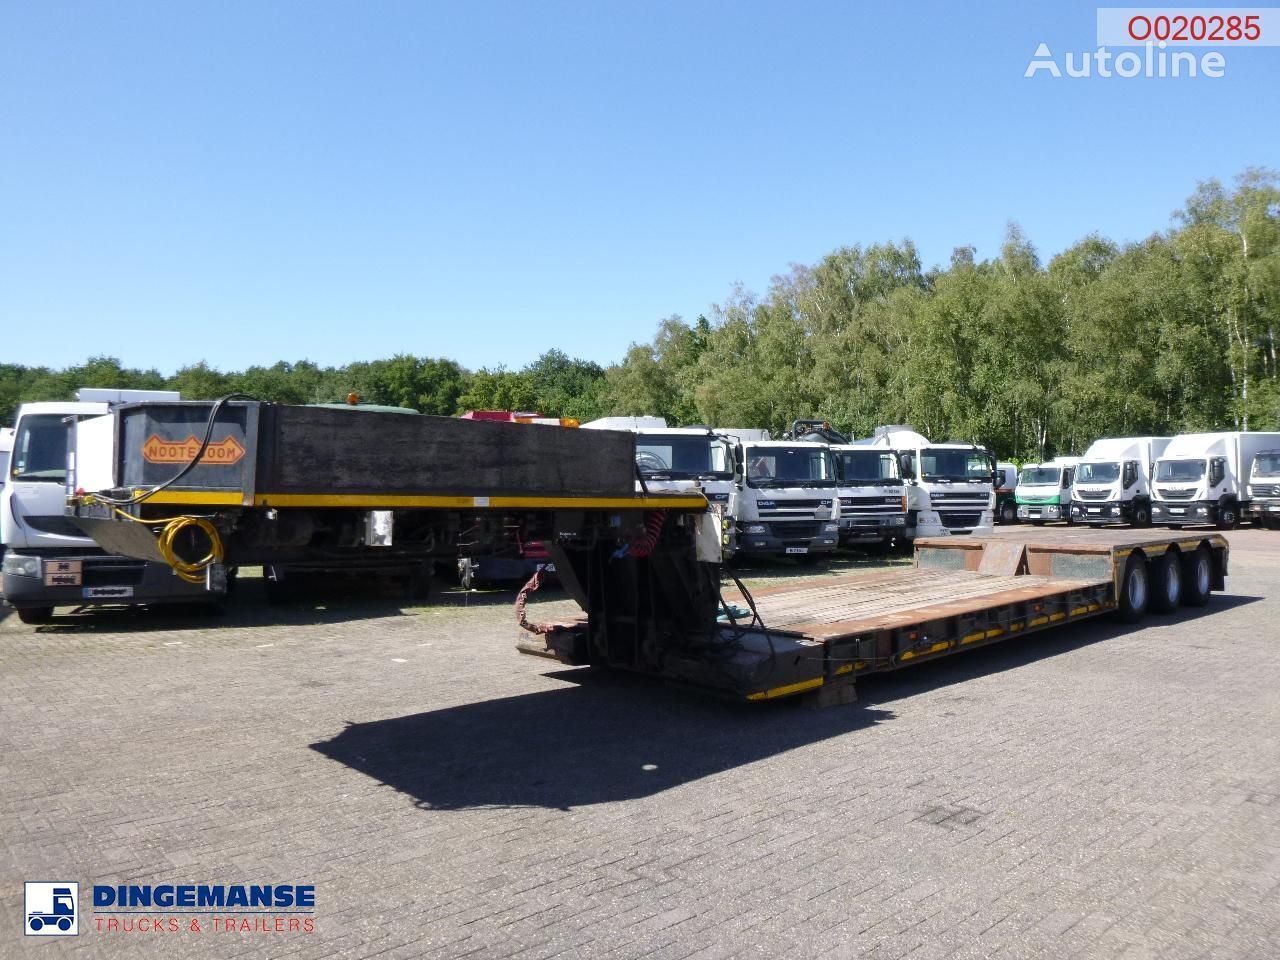 Nooteboom 3-axle lowbed trailer 33 t / extendable 8.5 m low bed semi-trailer